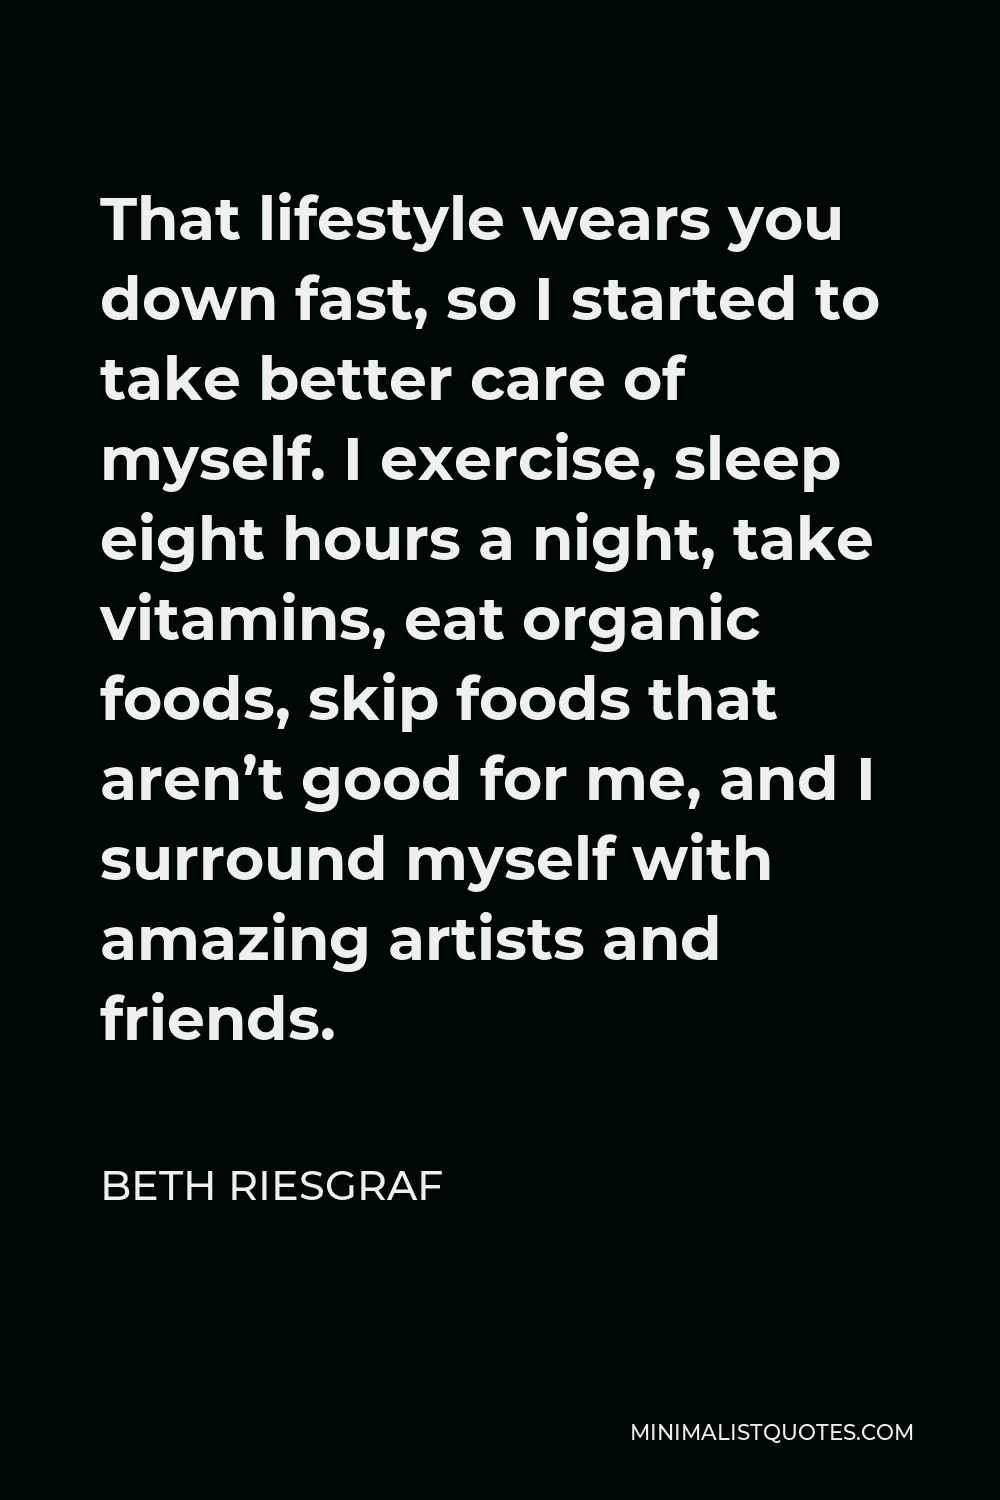 Beth Riesgraf Quote - That lifestyle wears you down fast, so I started to take better care of myself. I exercise, sleep eight hours a night, take vitamins, eat organic foods, skip foods that aren’t good for me, and I surround myself with amazing artists and friends.